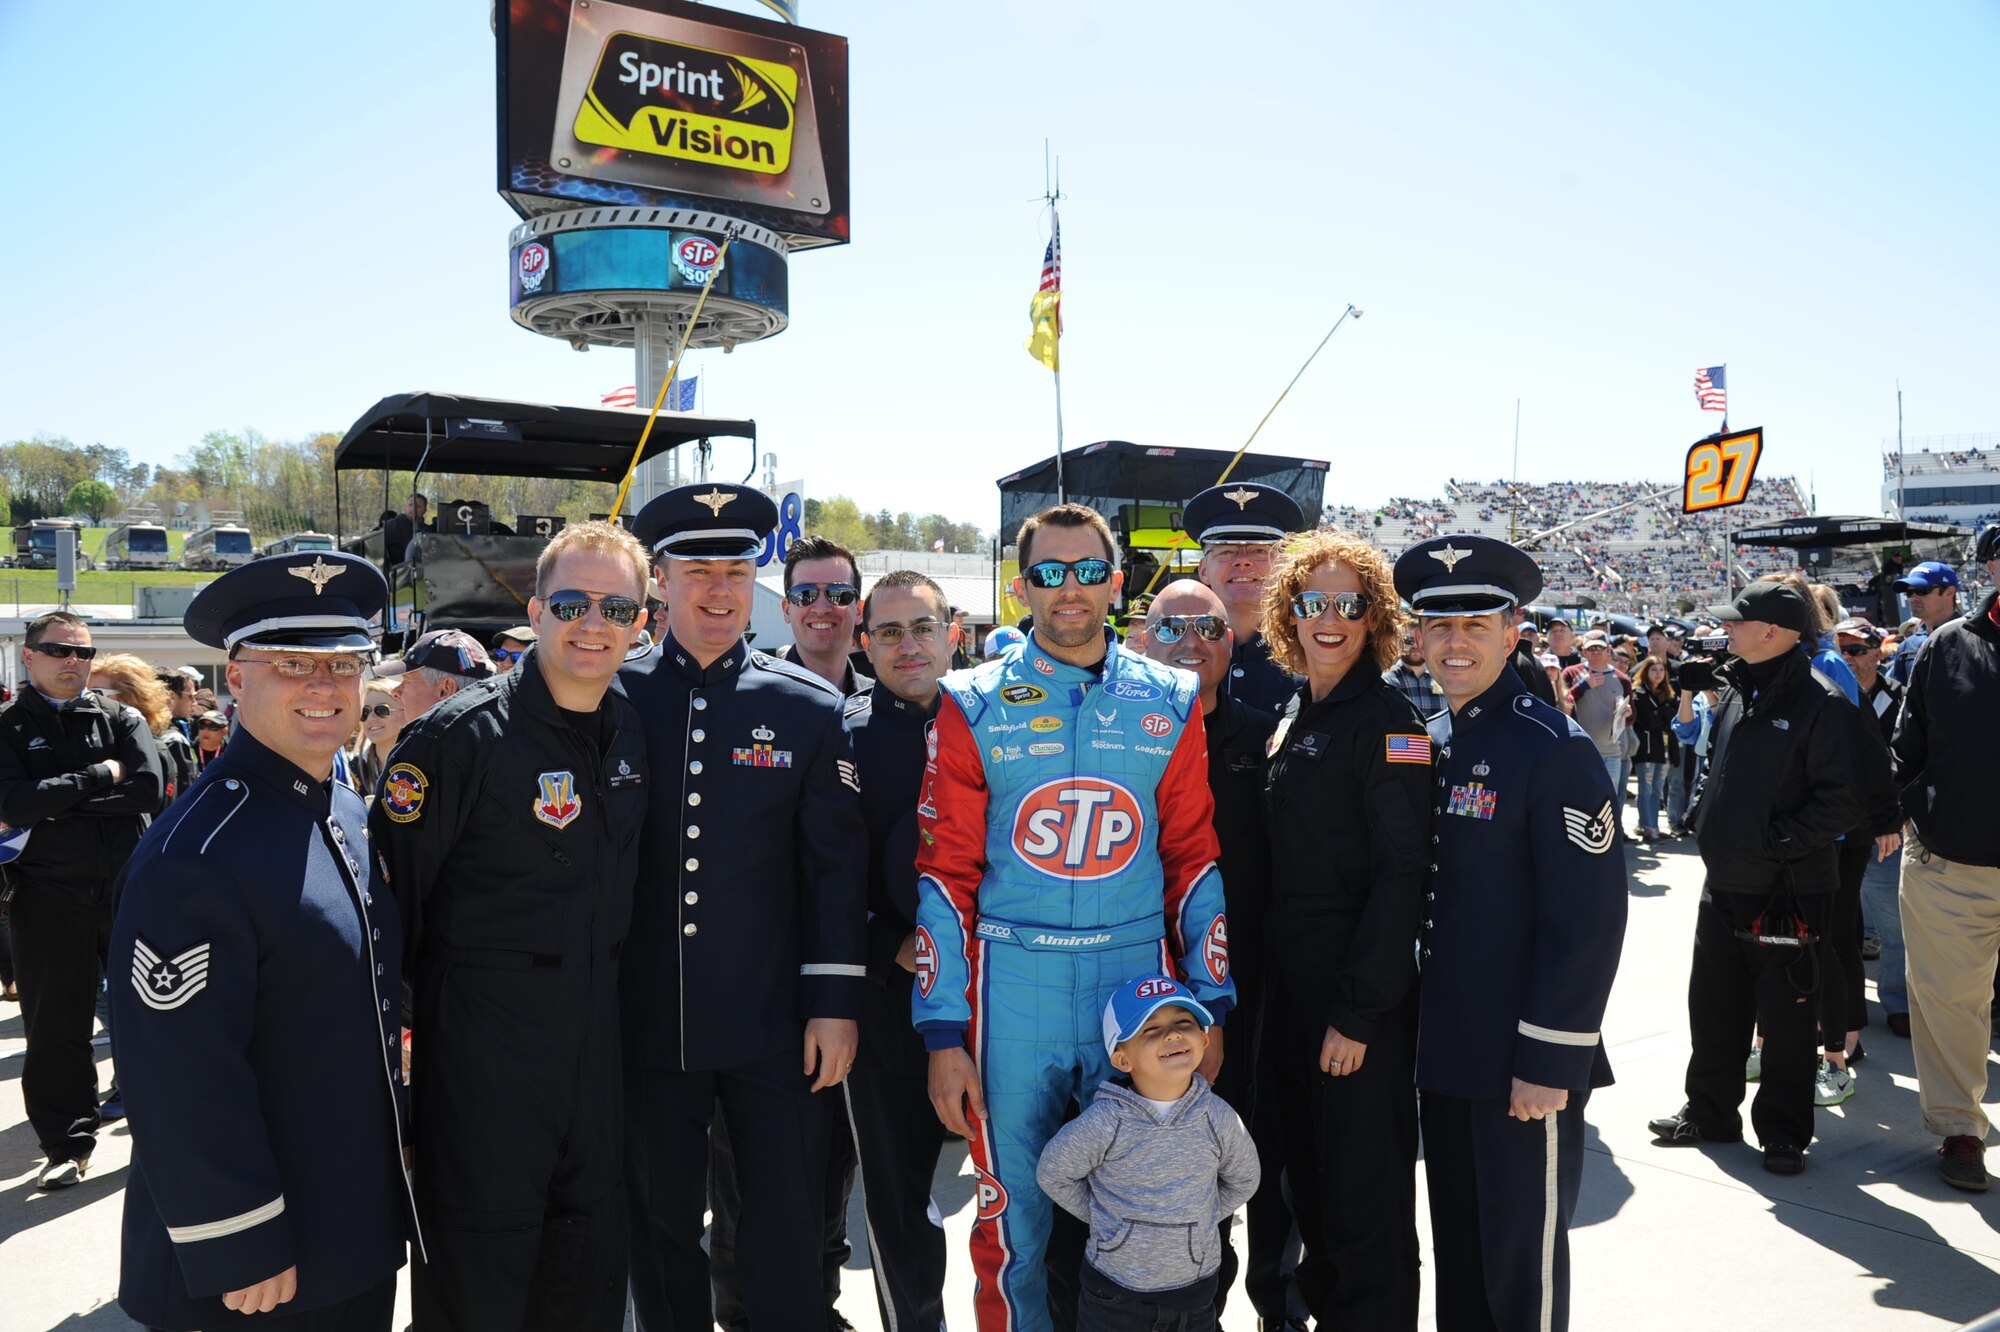 U.S. Air Force Heritage of America Band, Full Spectrum and Heritage brass members pose for a photograph with a NASCAR driver at Martinsville, Va., April 3, 2016.  The bands performed during a pre-race celebration which, also coincided with the commemoration of the 50th anniversary of the Vietnam War. (U.S. Air Force photo by Staff Sgt. William Anger)

